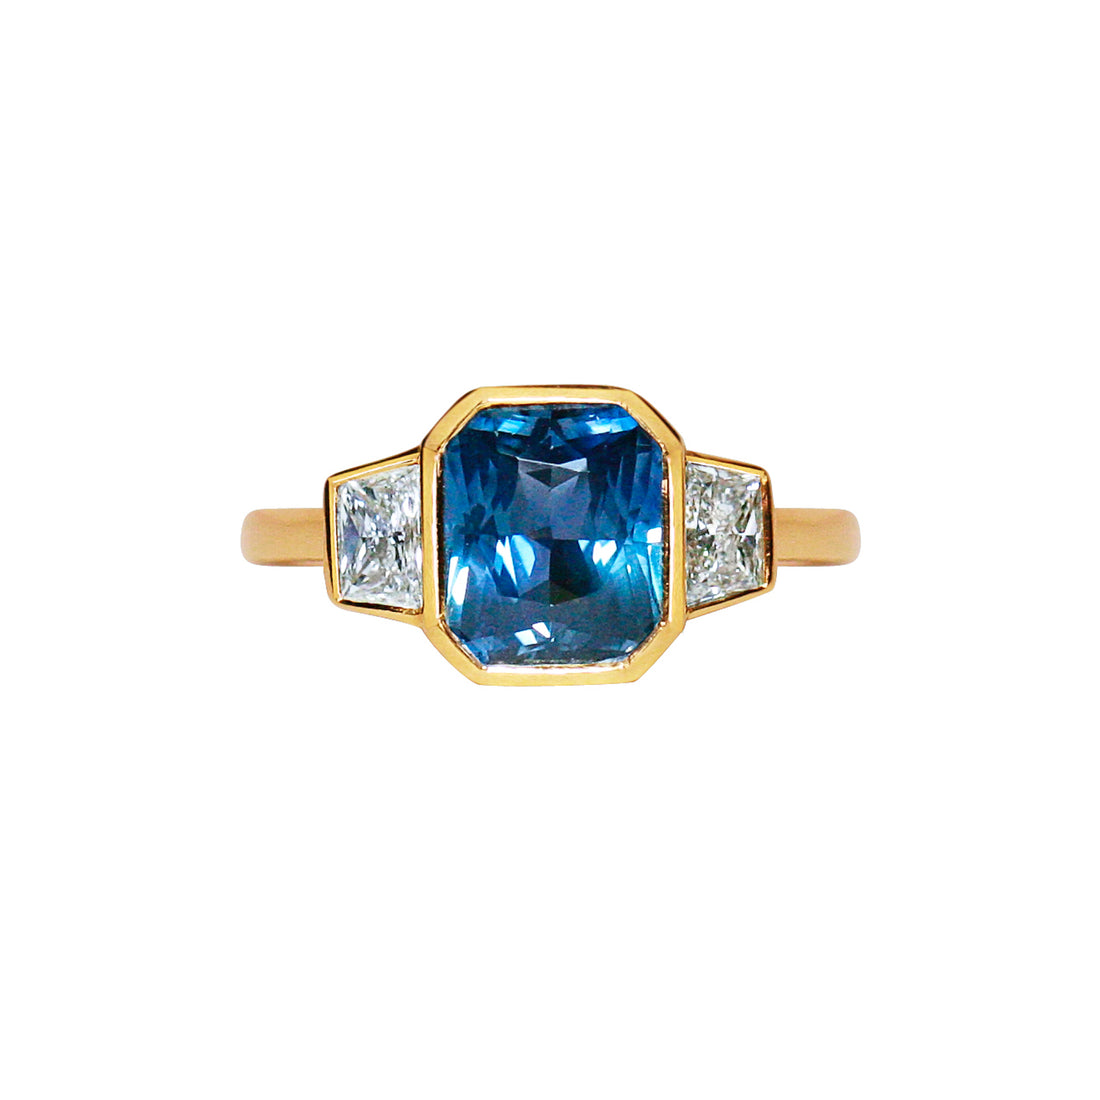  Blue Sapphire Art Deco Ring by Gee Woods | The Cut London